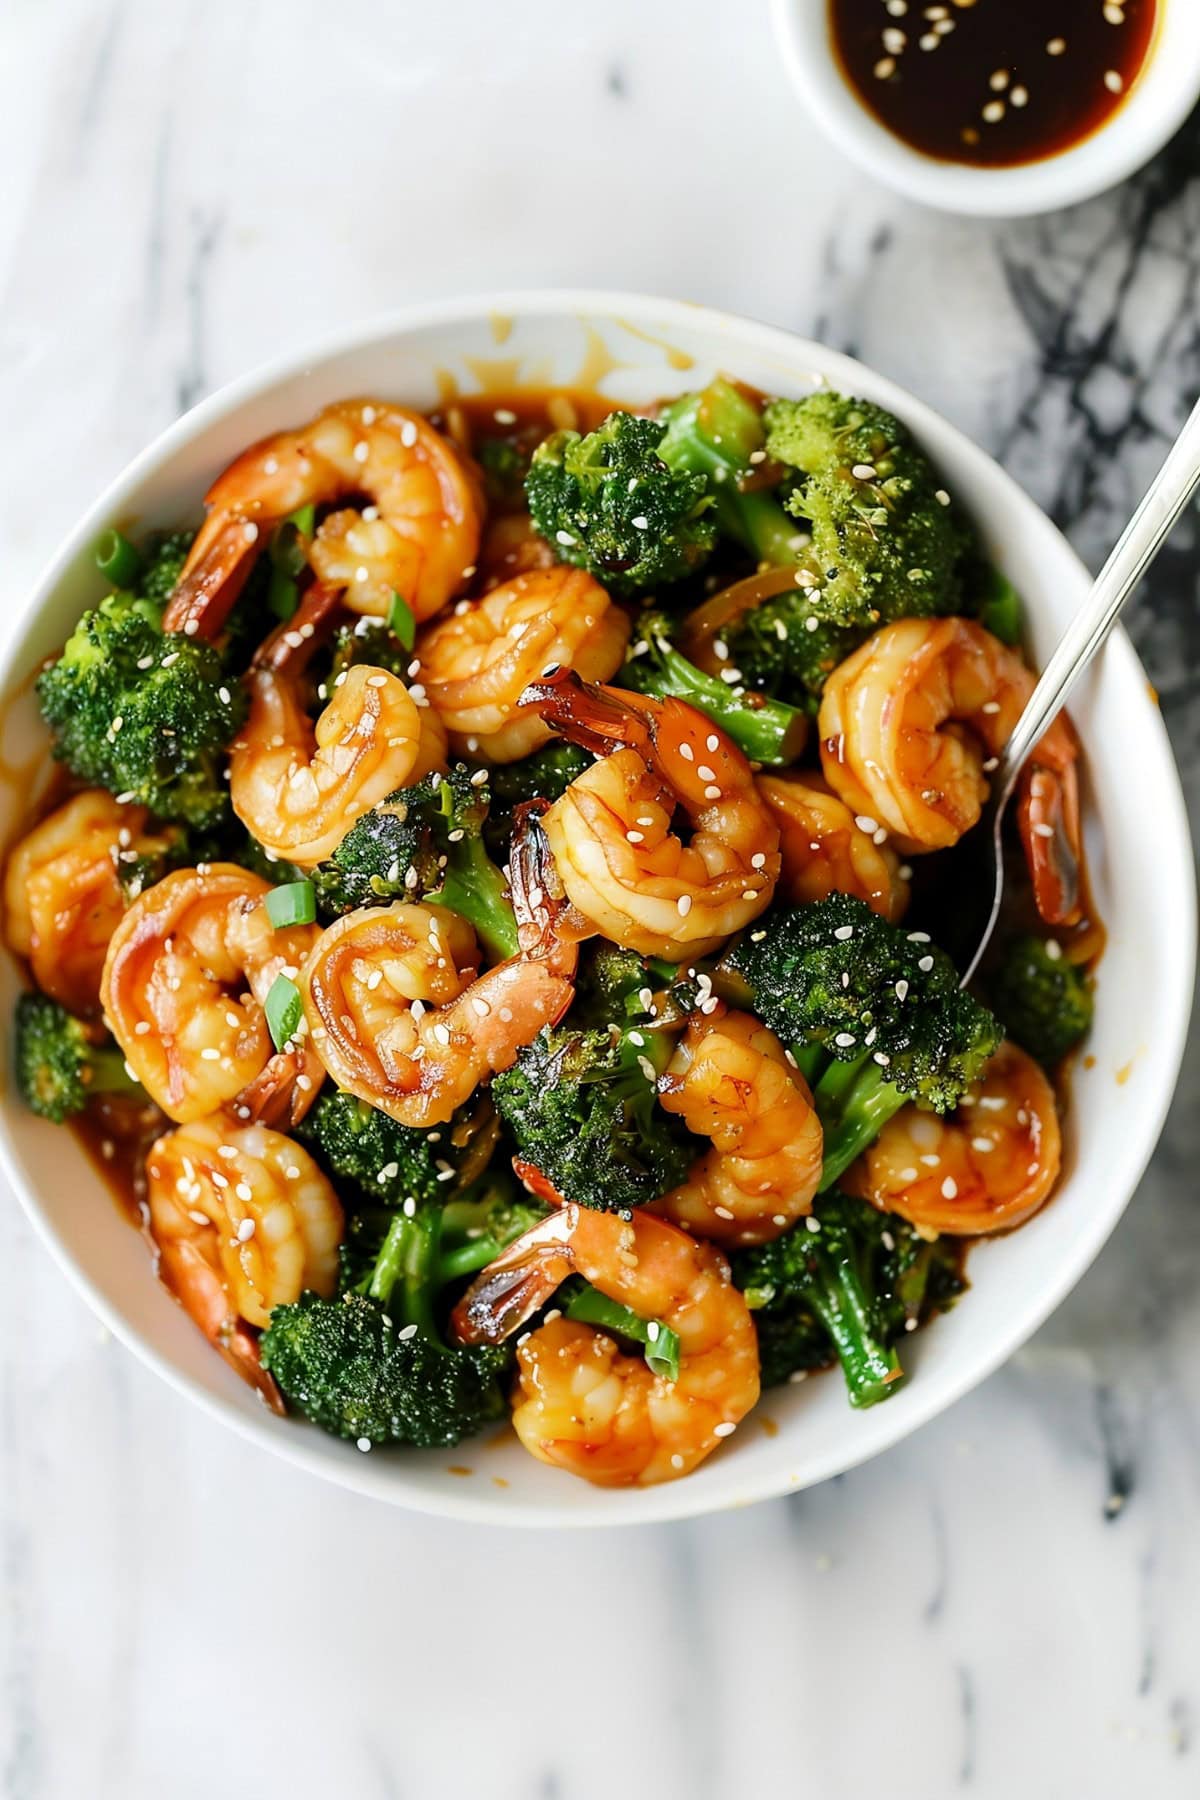 Tender and crunchy homemade shrimp and broccoli with green onions and sesame seeds, served with soy sauce